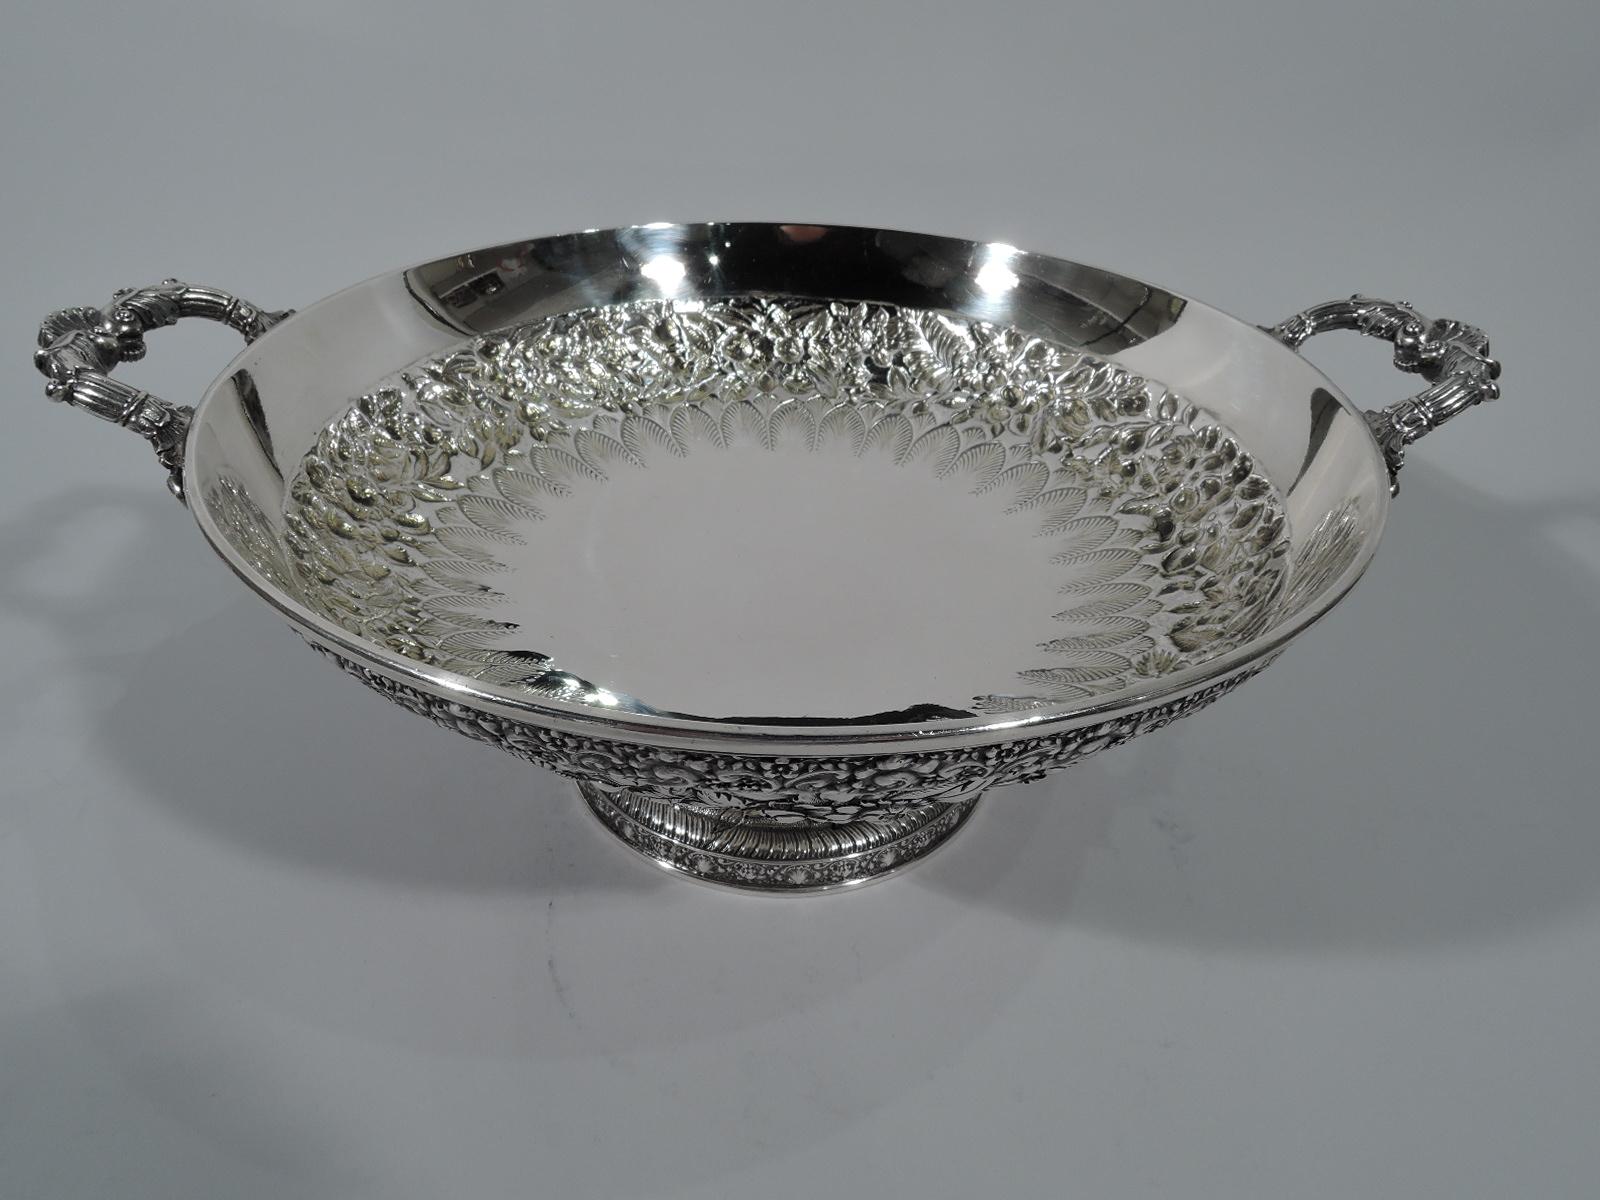 Classical sterling silver kylix with floral repousse. Made by Tiffany & Co. in New York. Traditional form with round and shallow bowl, leaf-mounted bracket handles, and raised foot. On exterior are bands of floral repousse and chased imbricated